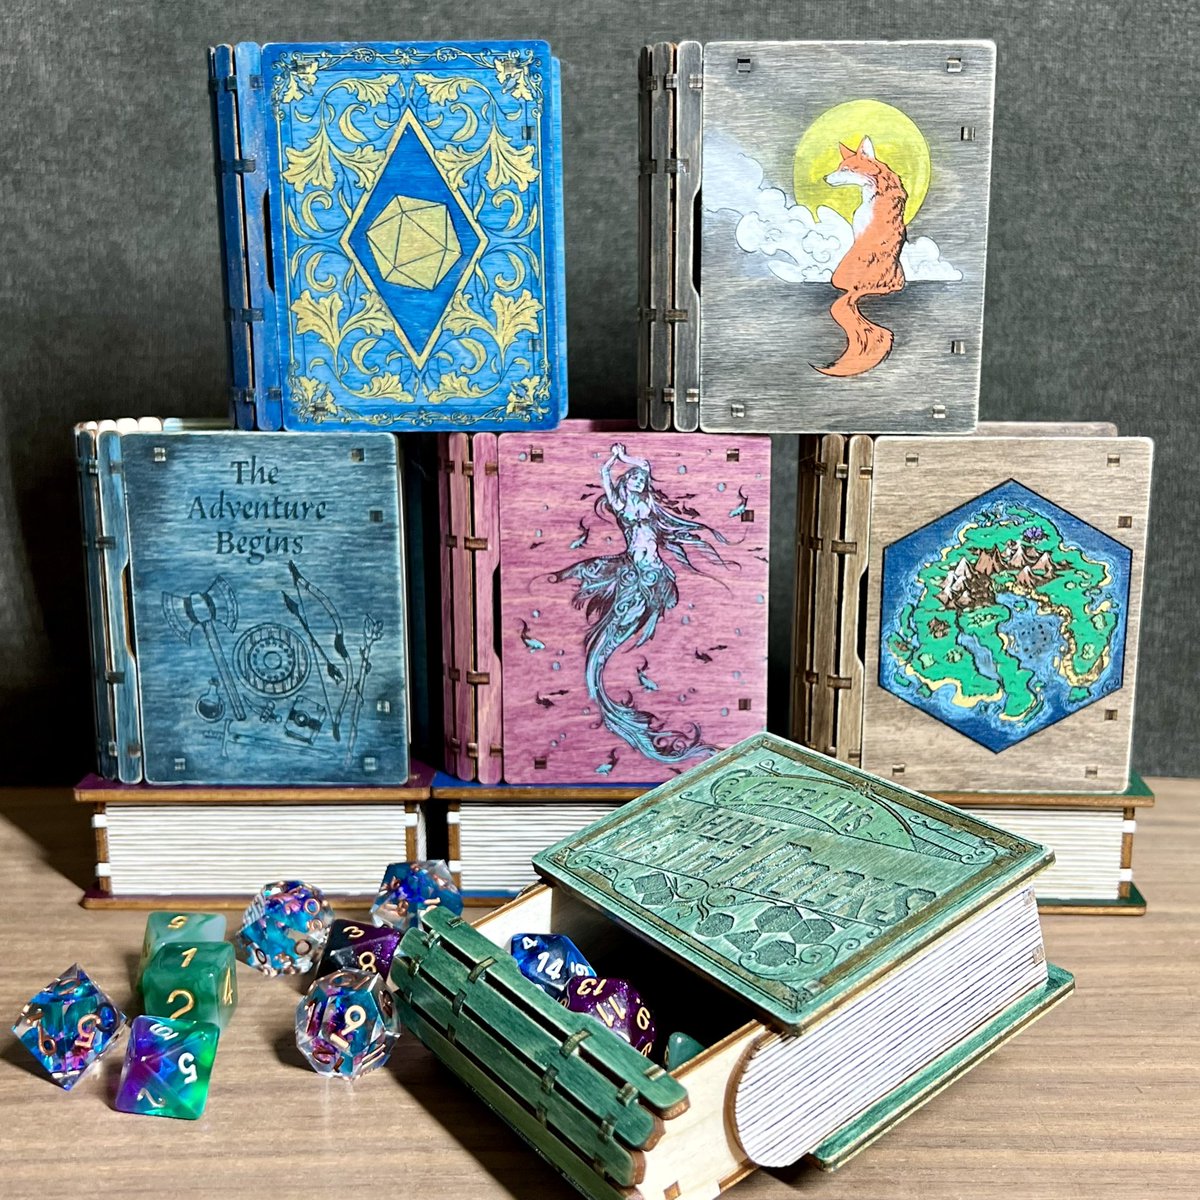 Painting your own little book of holding is the perfect way to personalize a box for your dice! Let me tell you some different ways to add your own flair! 🧵